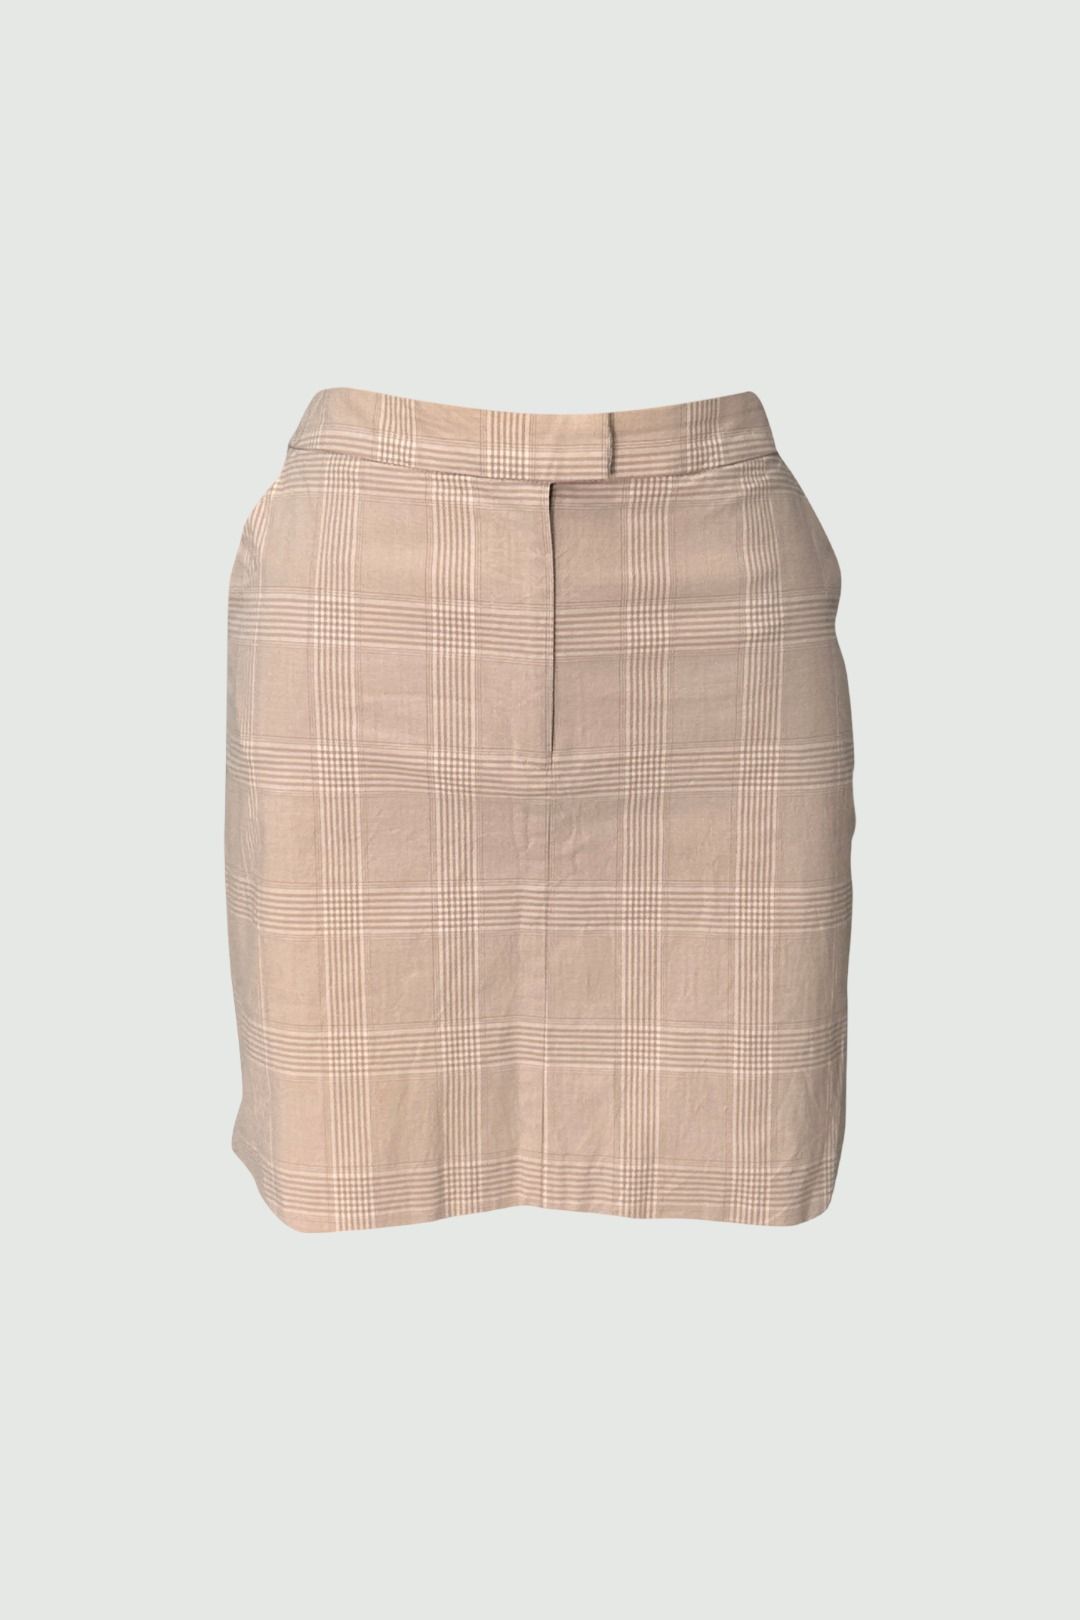 Viktoria and Woods Hierarchy Checked Mini Skirt in Nude